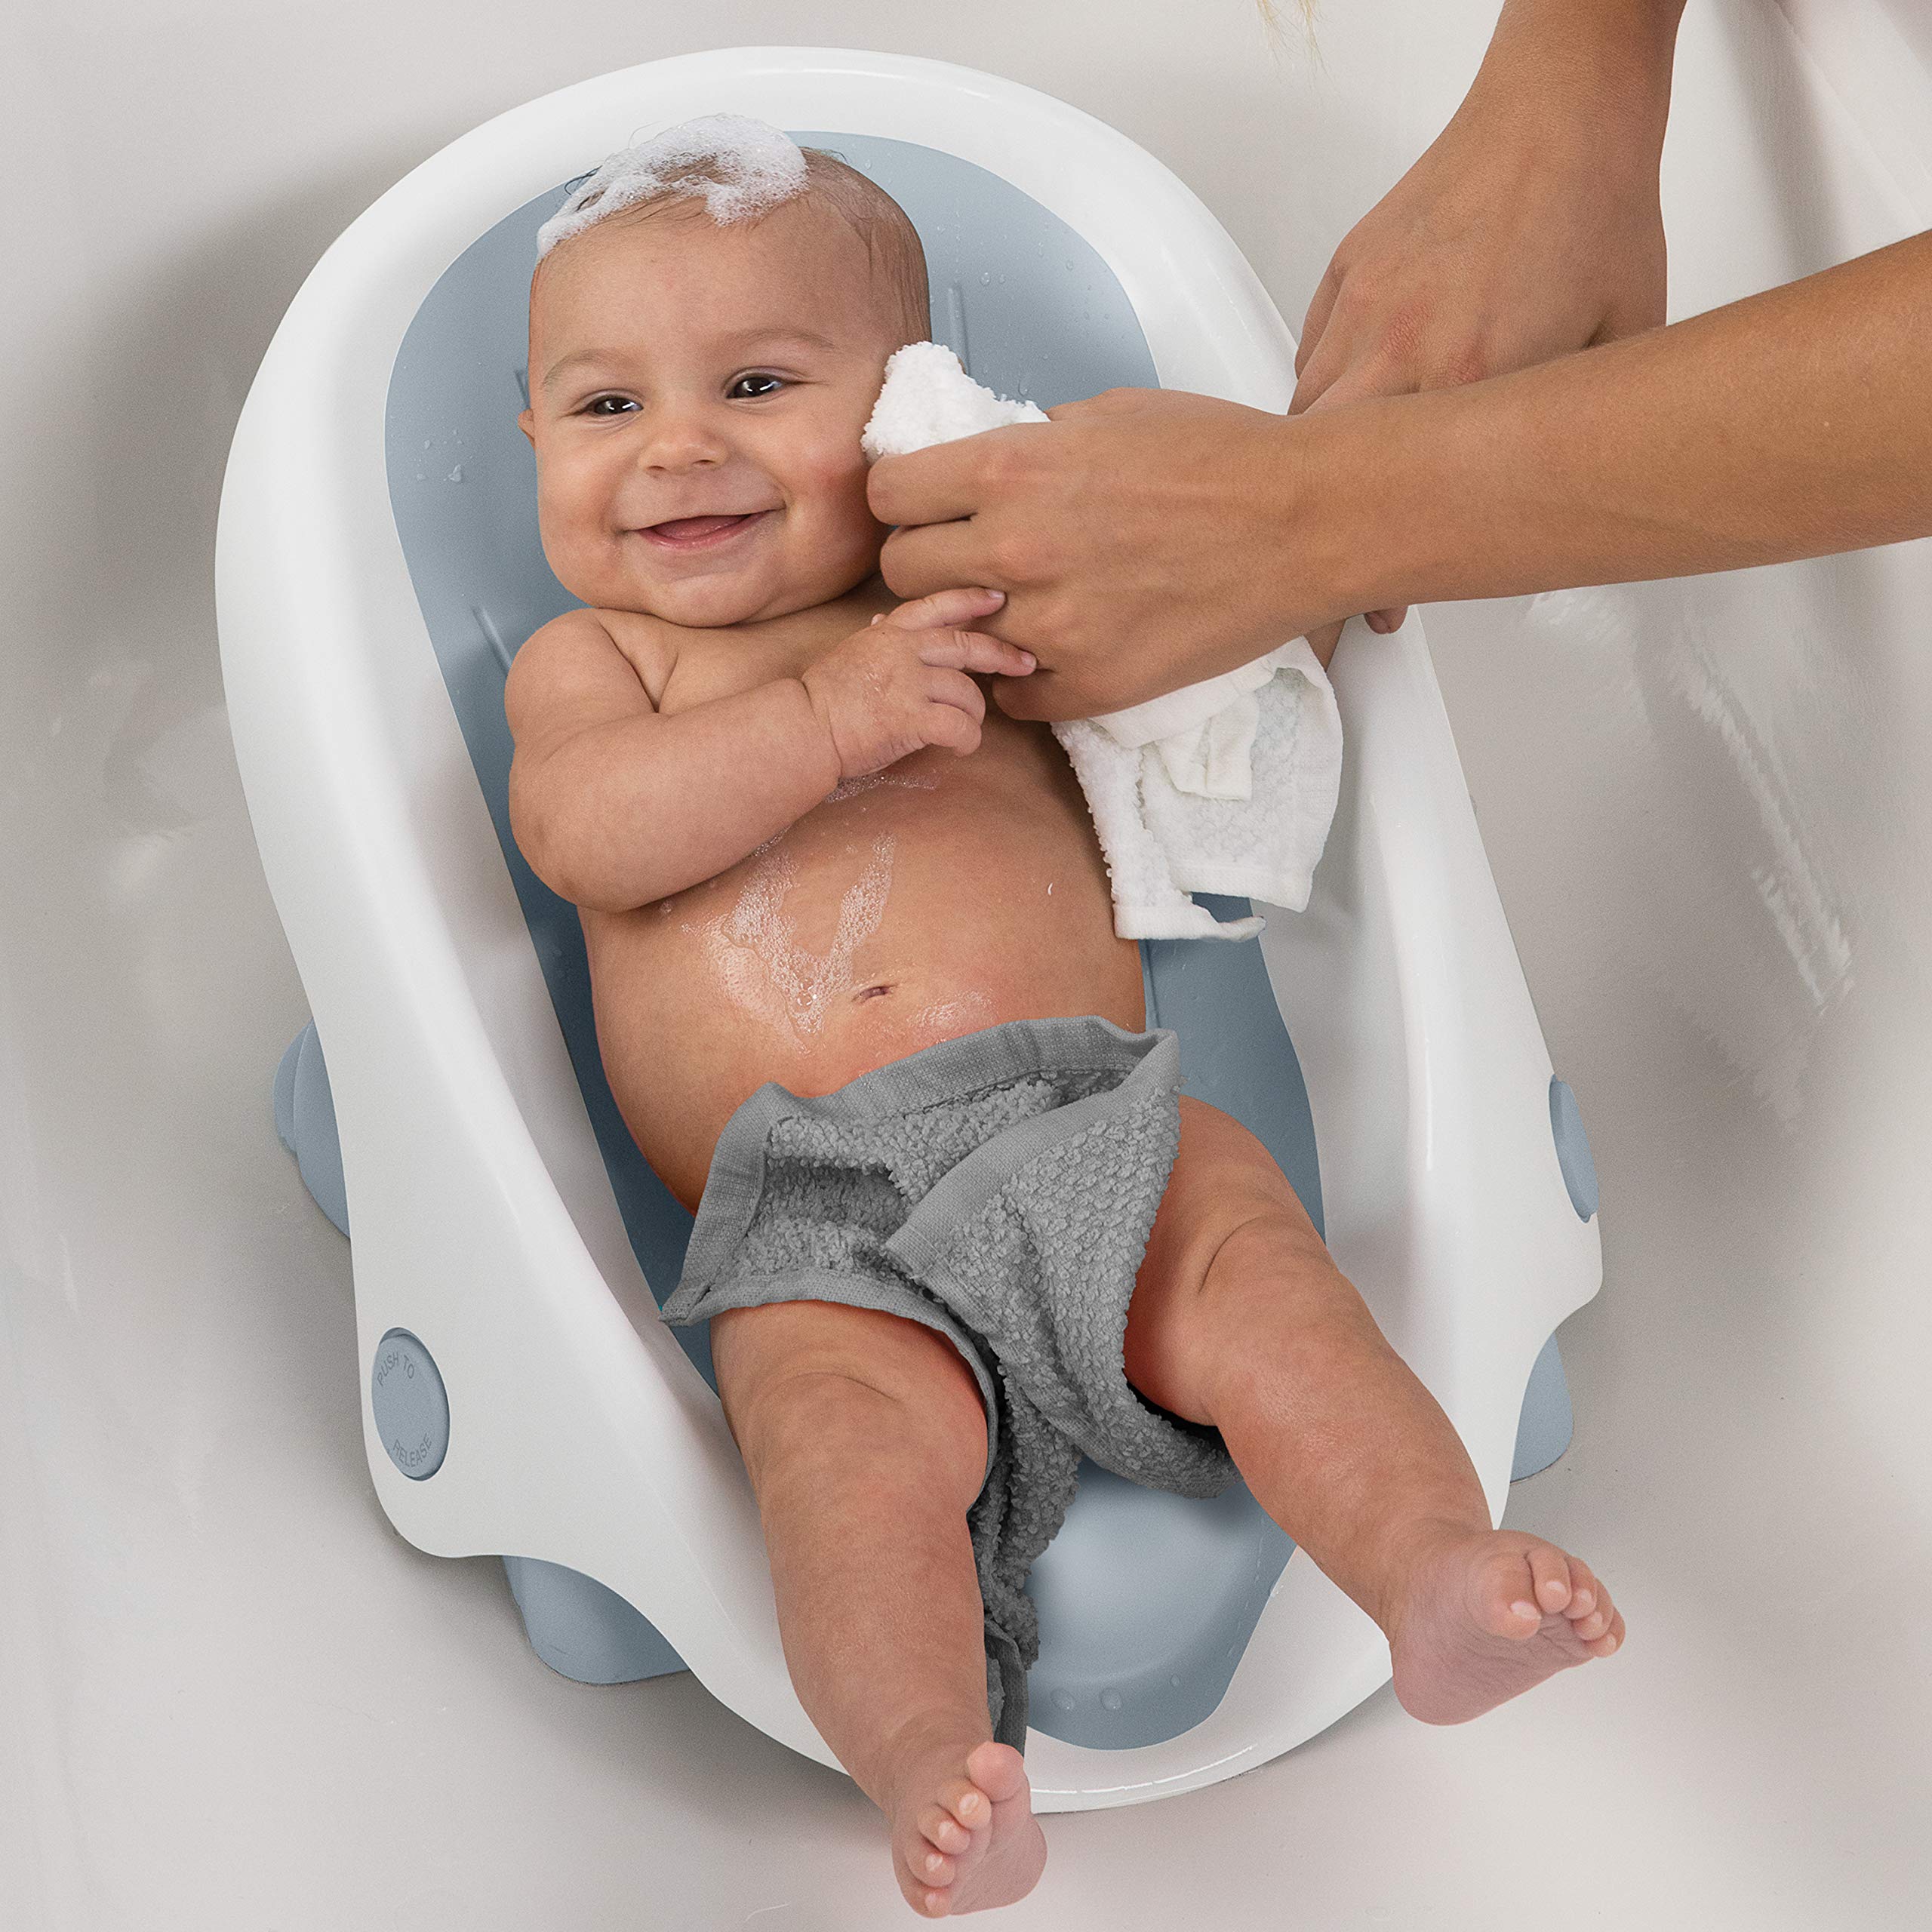 Summer Clean Rinse Baby Bather (Gray) – Bath Support for Use on the Counter, in the Sink or in the Bathtub, Has 3 Reclining Positions and Soft, Quick-Dry Material – Use from Birth until Sitting Up